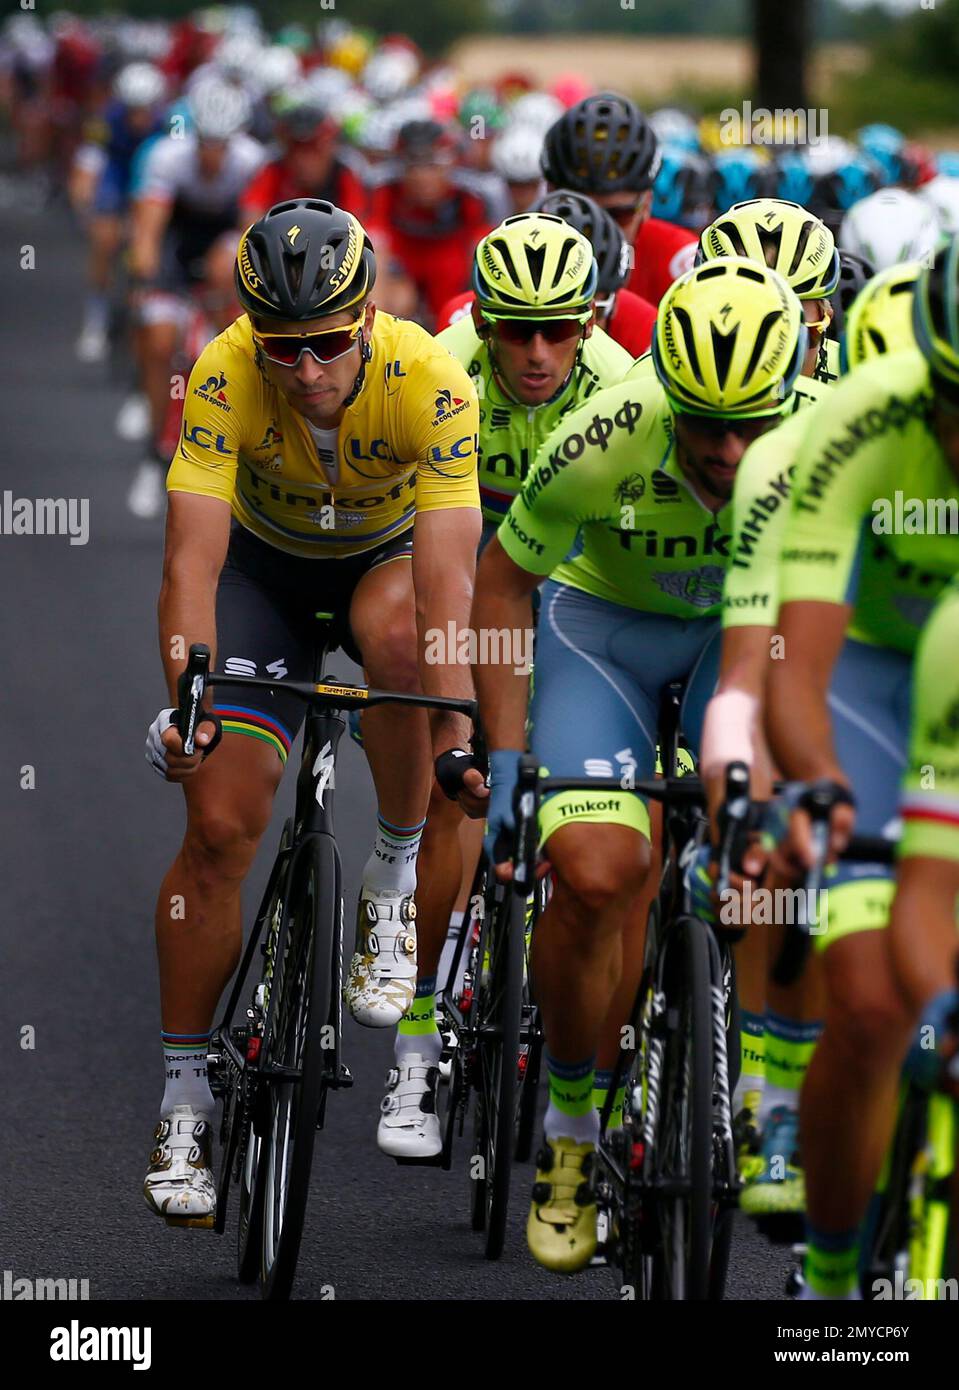 Peter Sagan of Slovakia, wearing the overall leader's yellow jersey, left,  rides in the pack during the fourth stage of the Tour de France cycling  race over 237.5 kilometers (147.3 miles) with